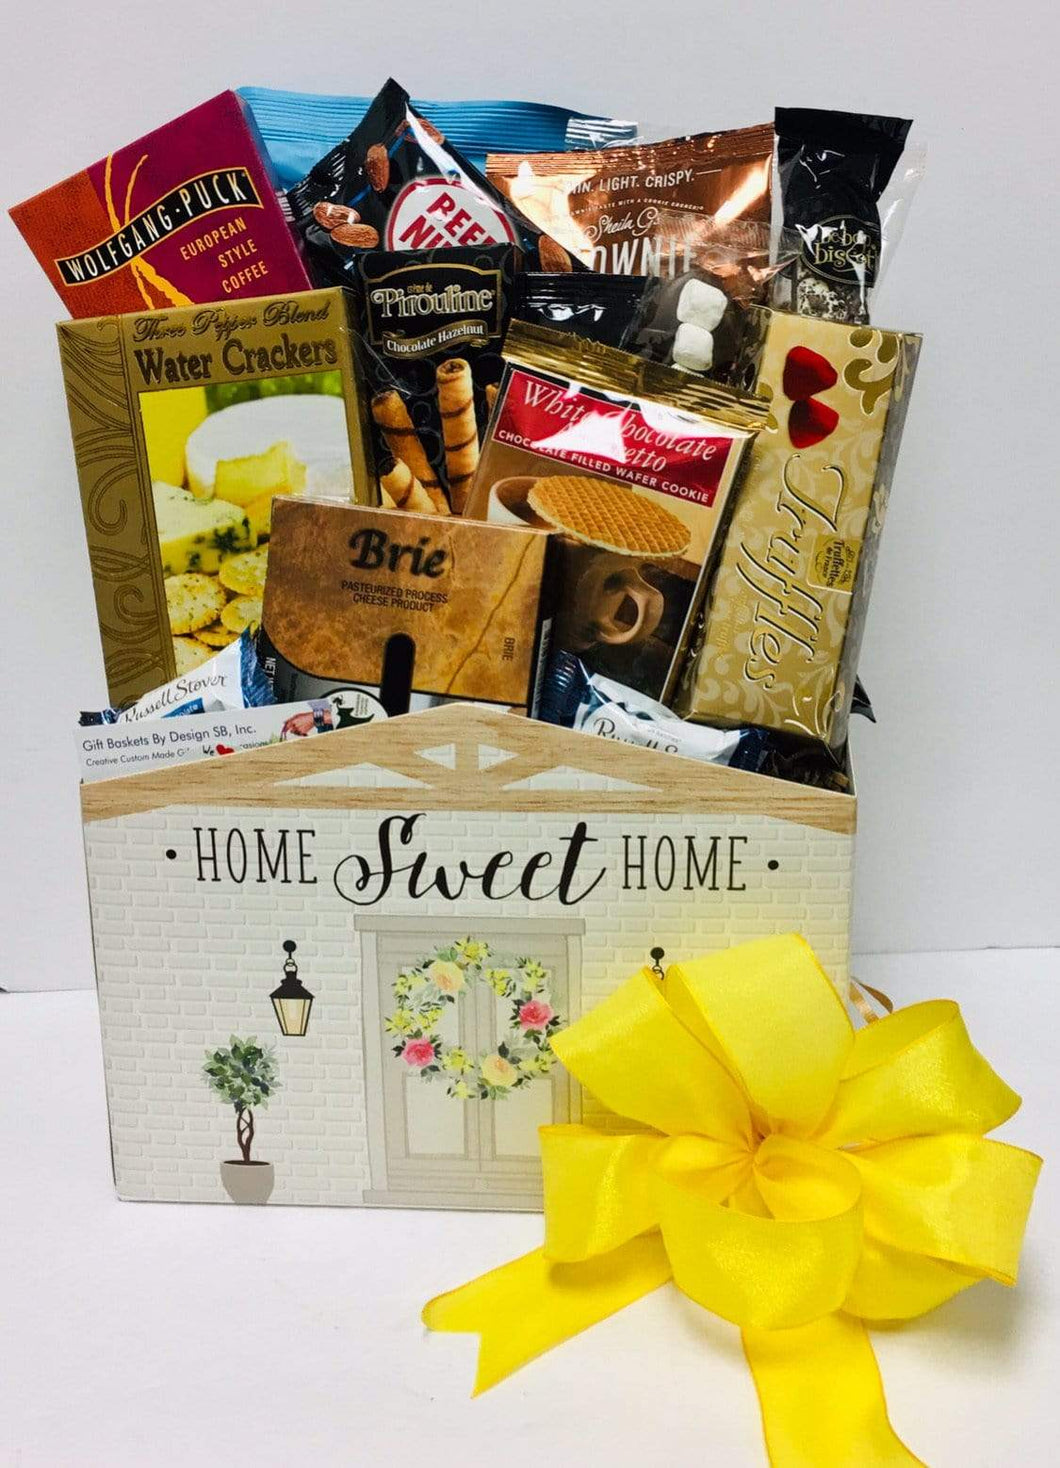 Touch of Home - Gift Baskets By Design SB, Inc.